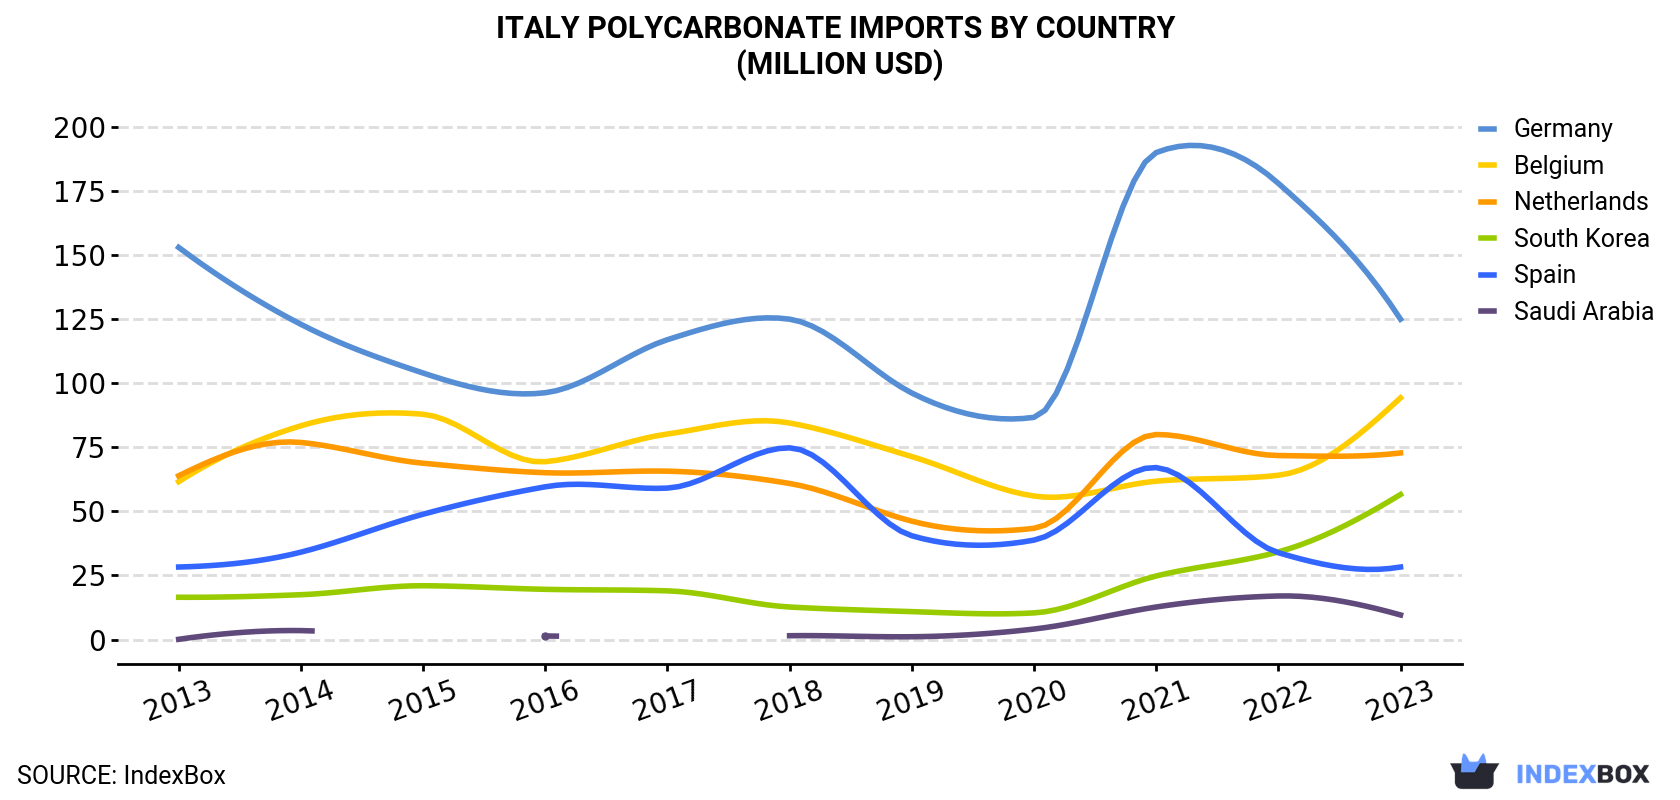 Italy Polycarbonate Imports By Country (Million USD)